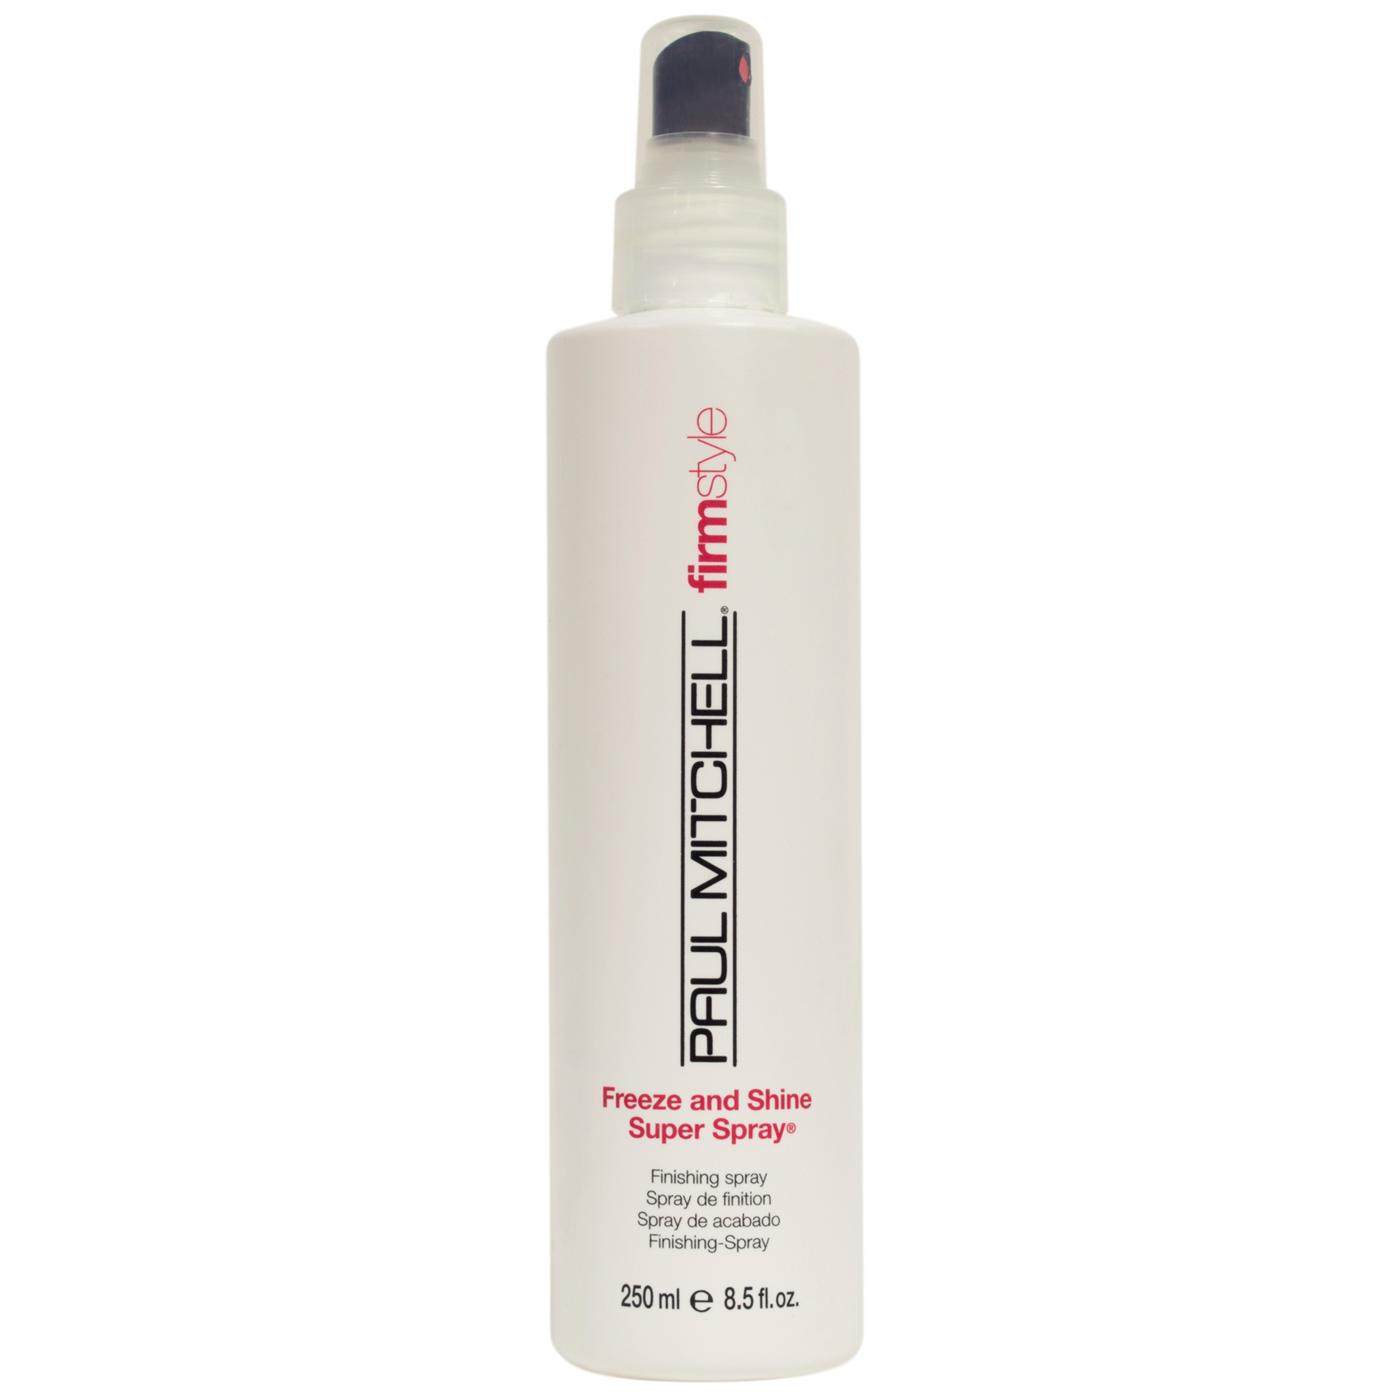 Paul Mitchell Firm Style Freeze And Shine Super Spray; image 2 of 2